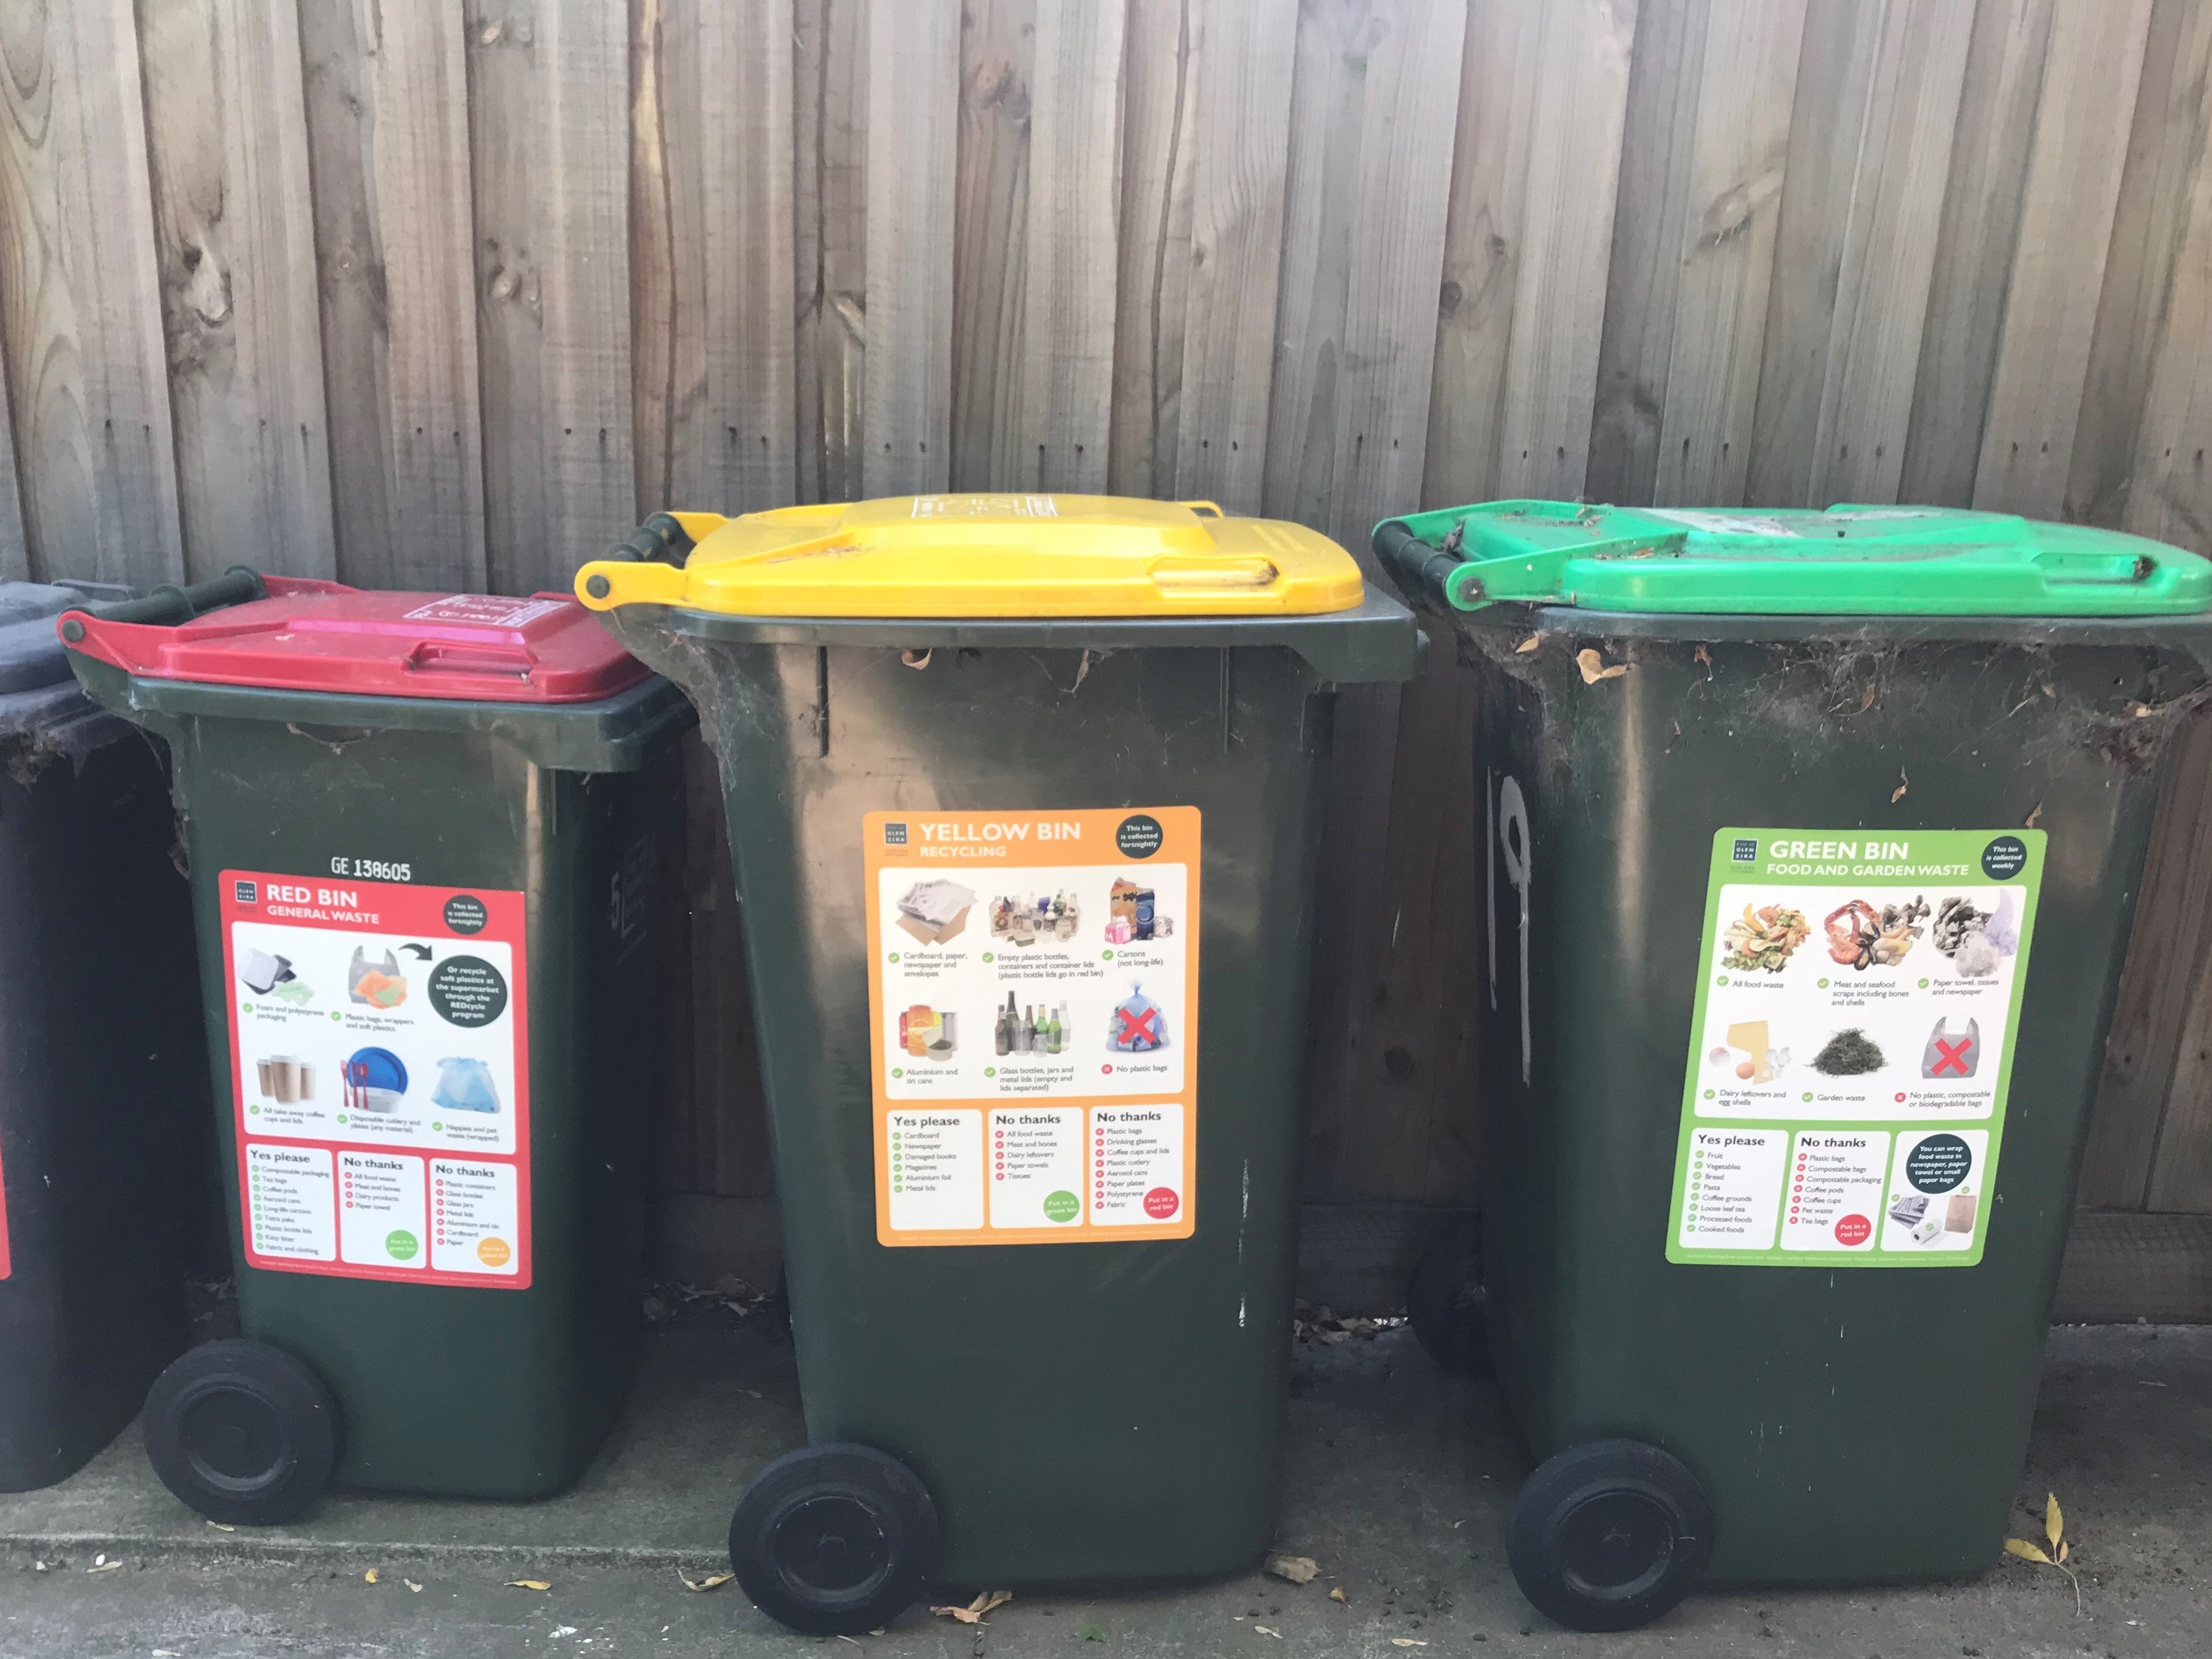 Contact us for a wheelie bin sticker pack for your school.